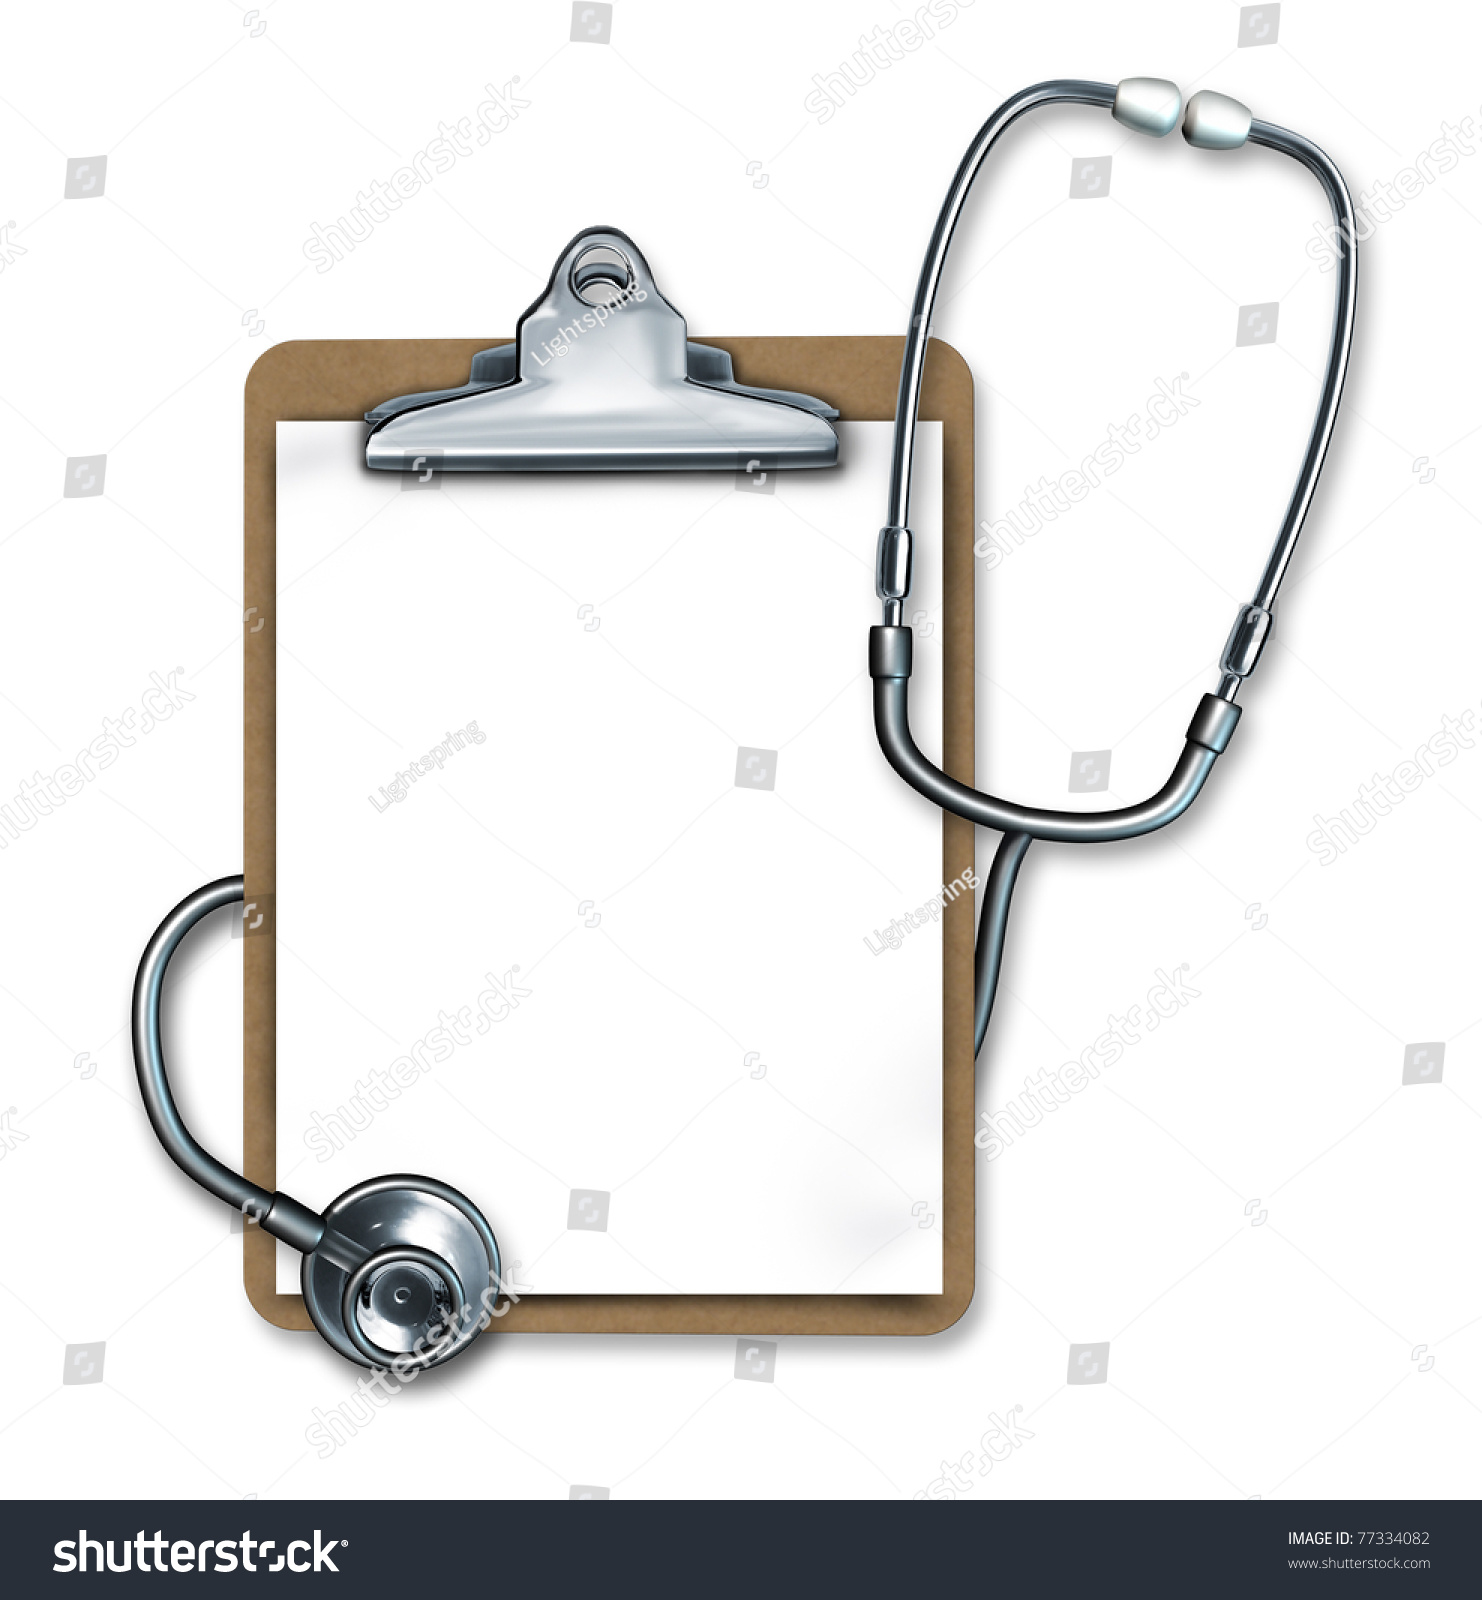 factor Formulate Generous Medical Notes Symbol Represented By Stethoscope Stock Illustration 77334082  | Shutterstock